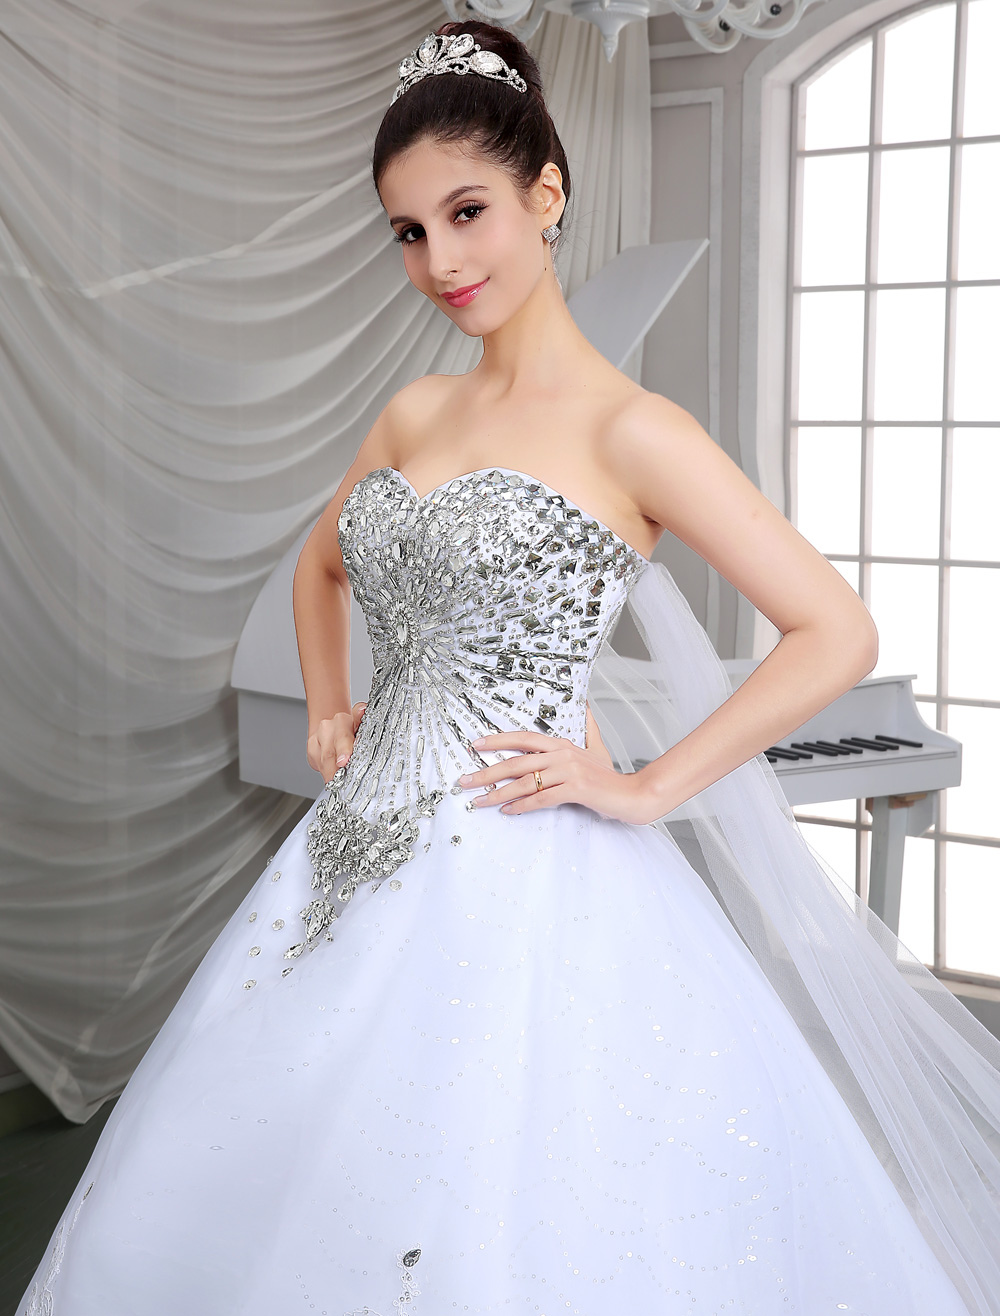 Amazing Wedding Dress With Rhinestones  The ultimate guide 